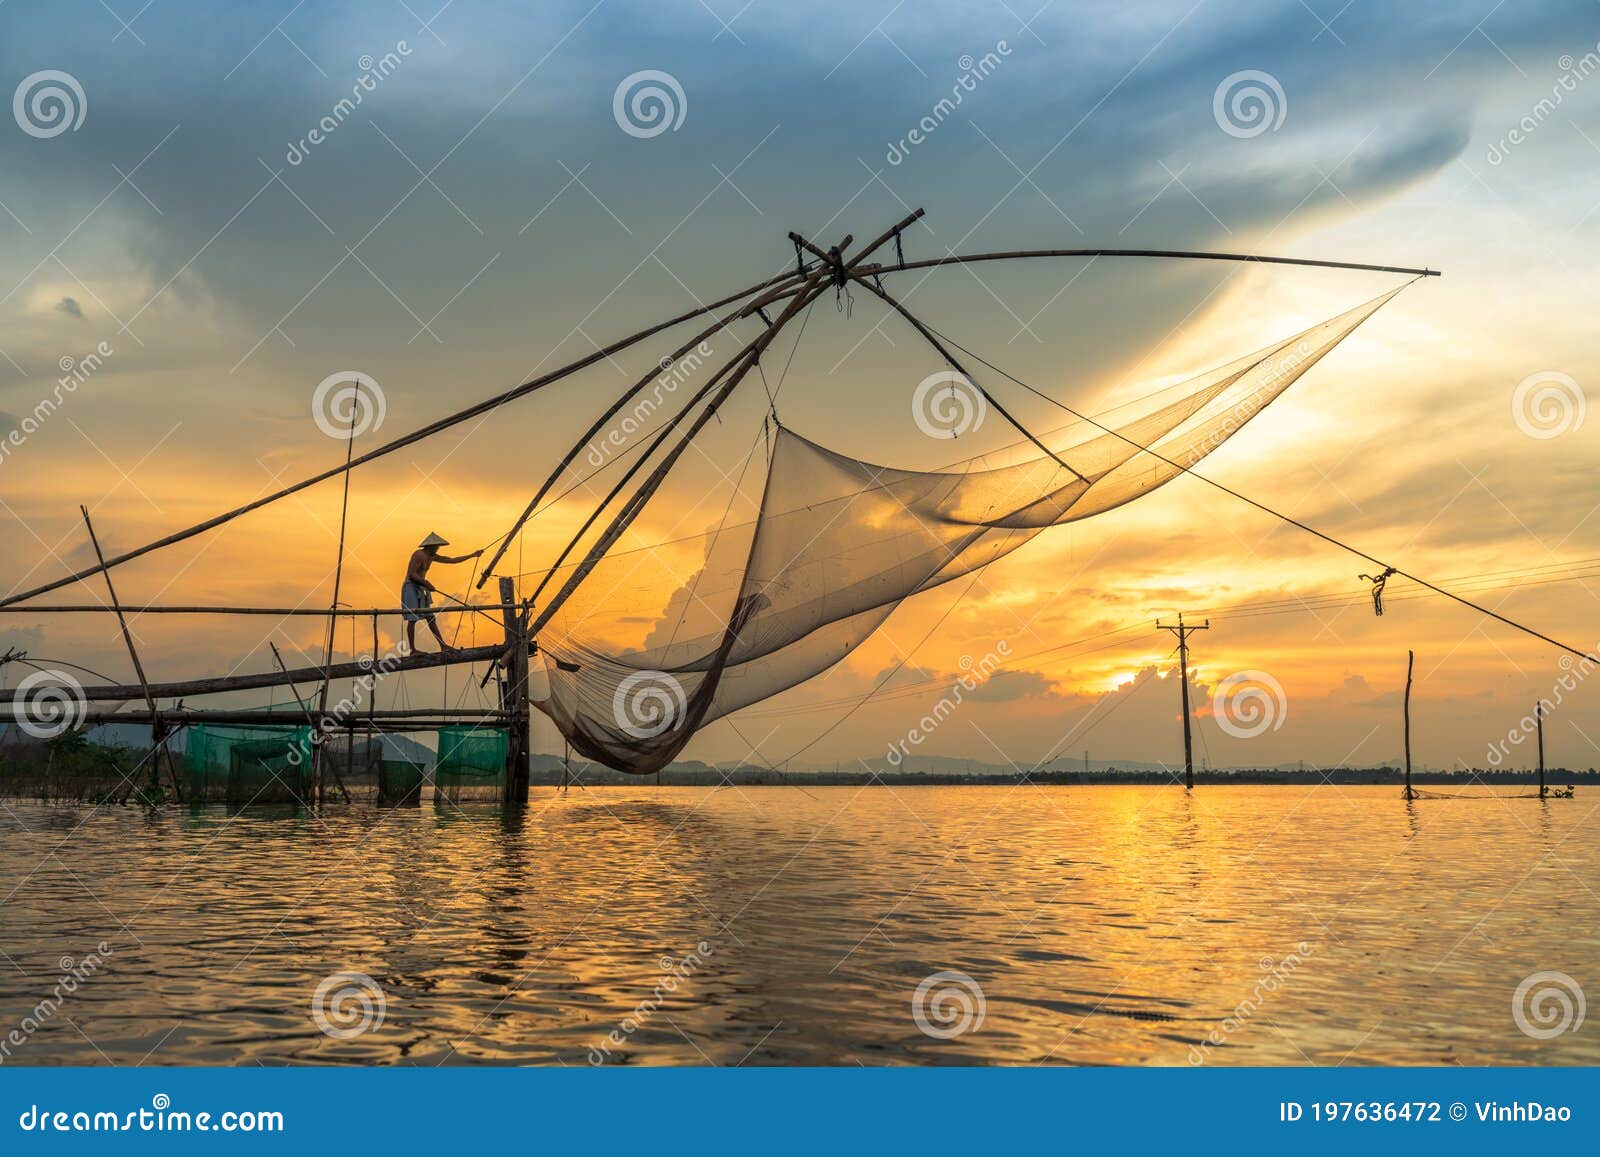 Mekong Delta Landscape with Big Fishing Net in Floating Water